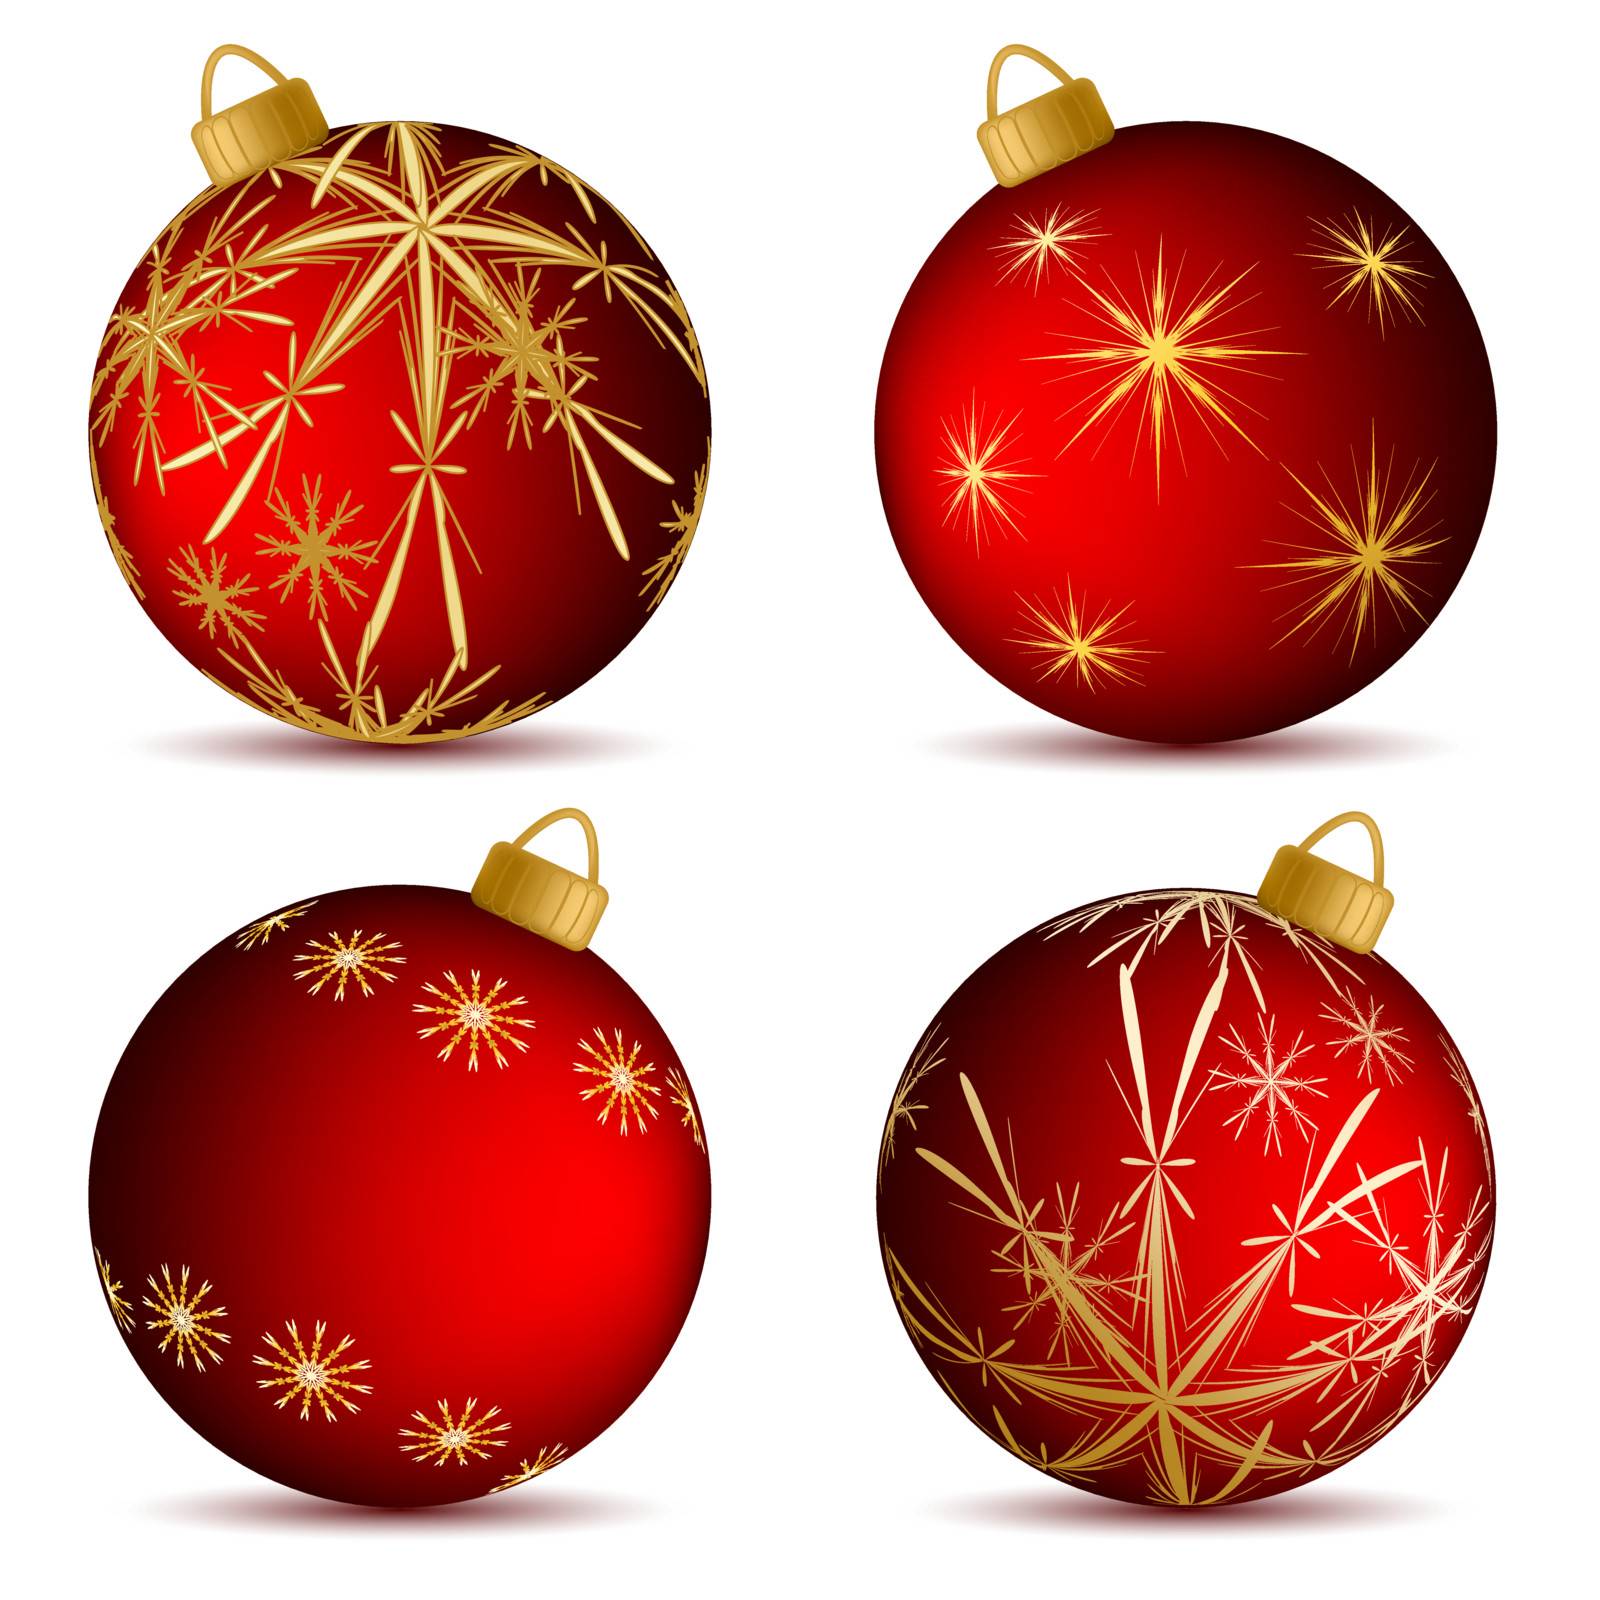 vector Christmas elements for design over white background